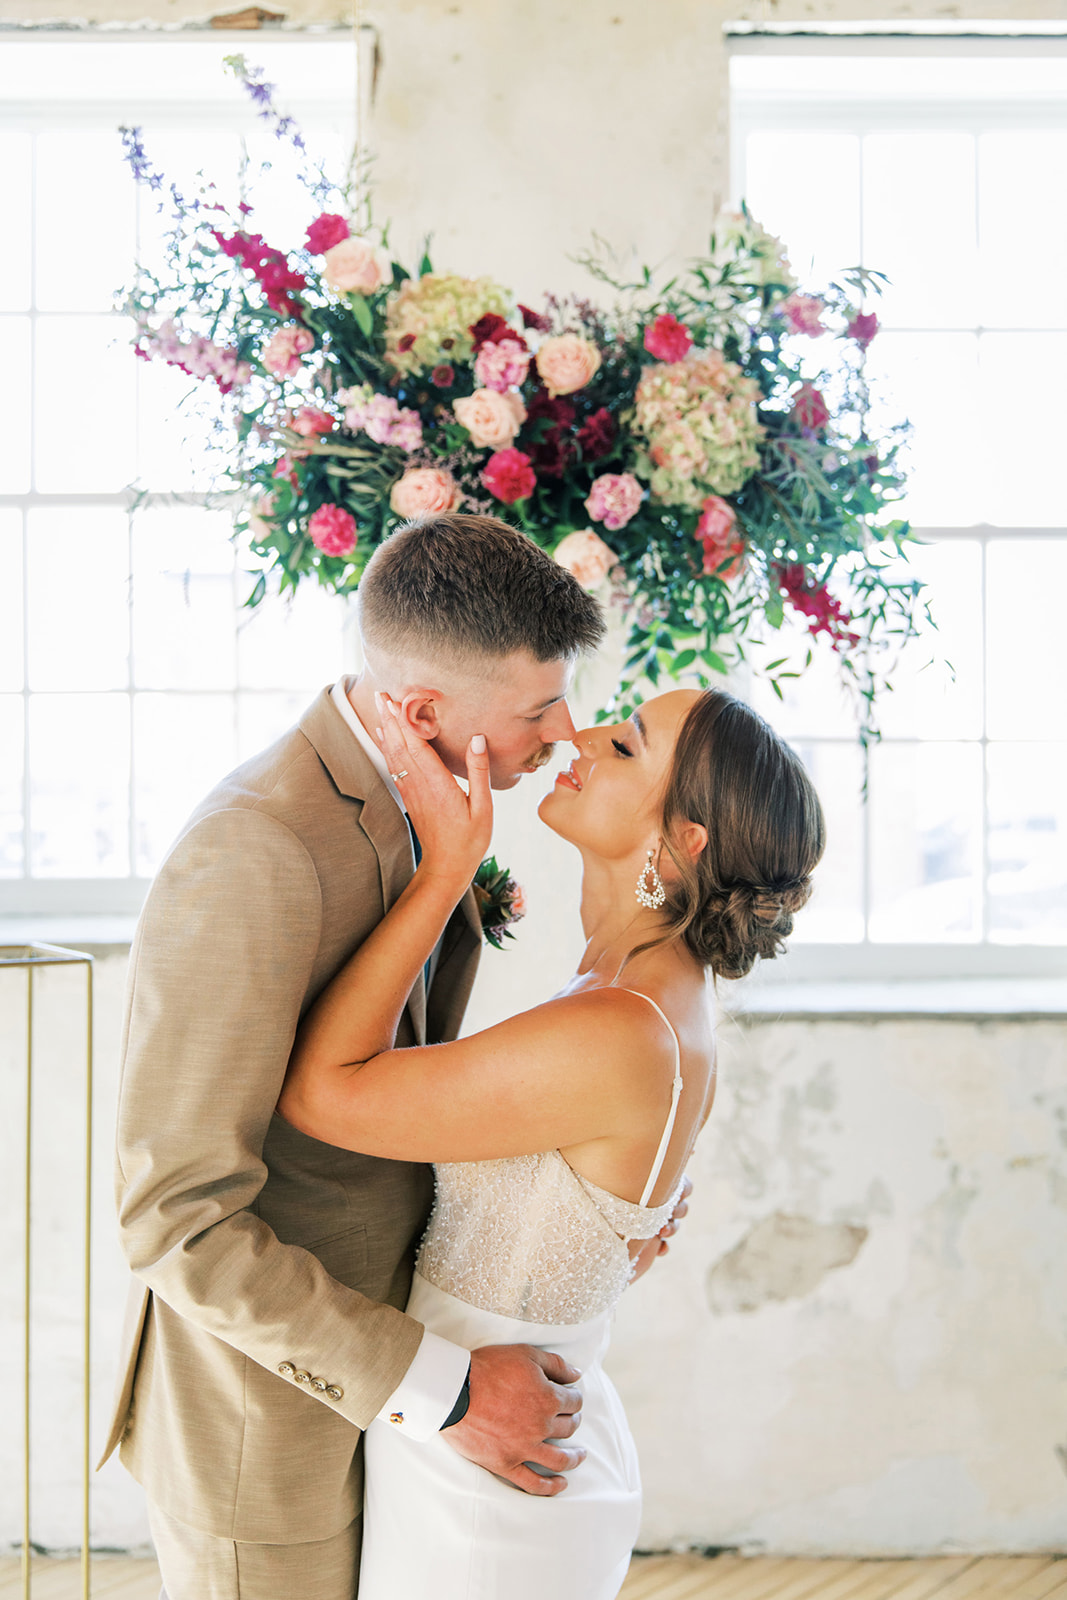 Couple kissing during romantic, vintage inspired wedding ceremony, featuring hanging florals created by Rose & Vine.